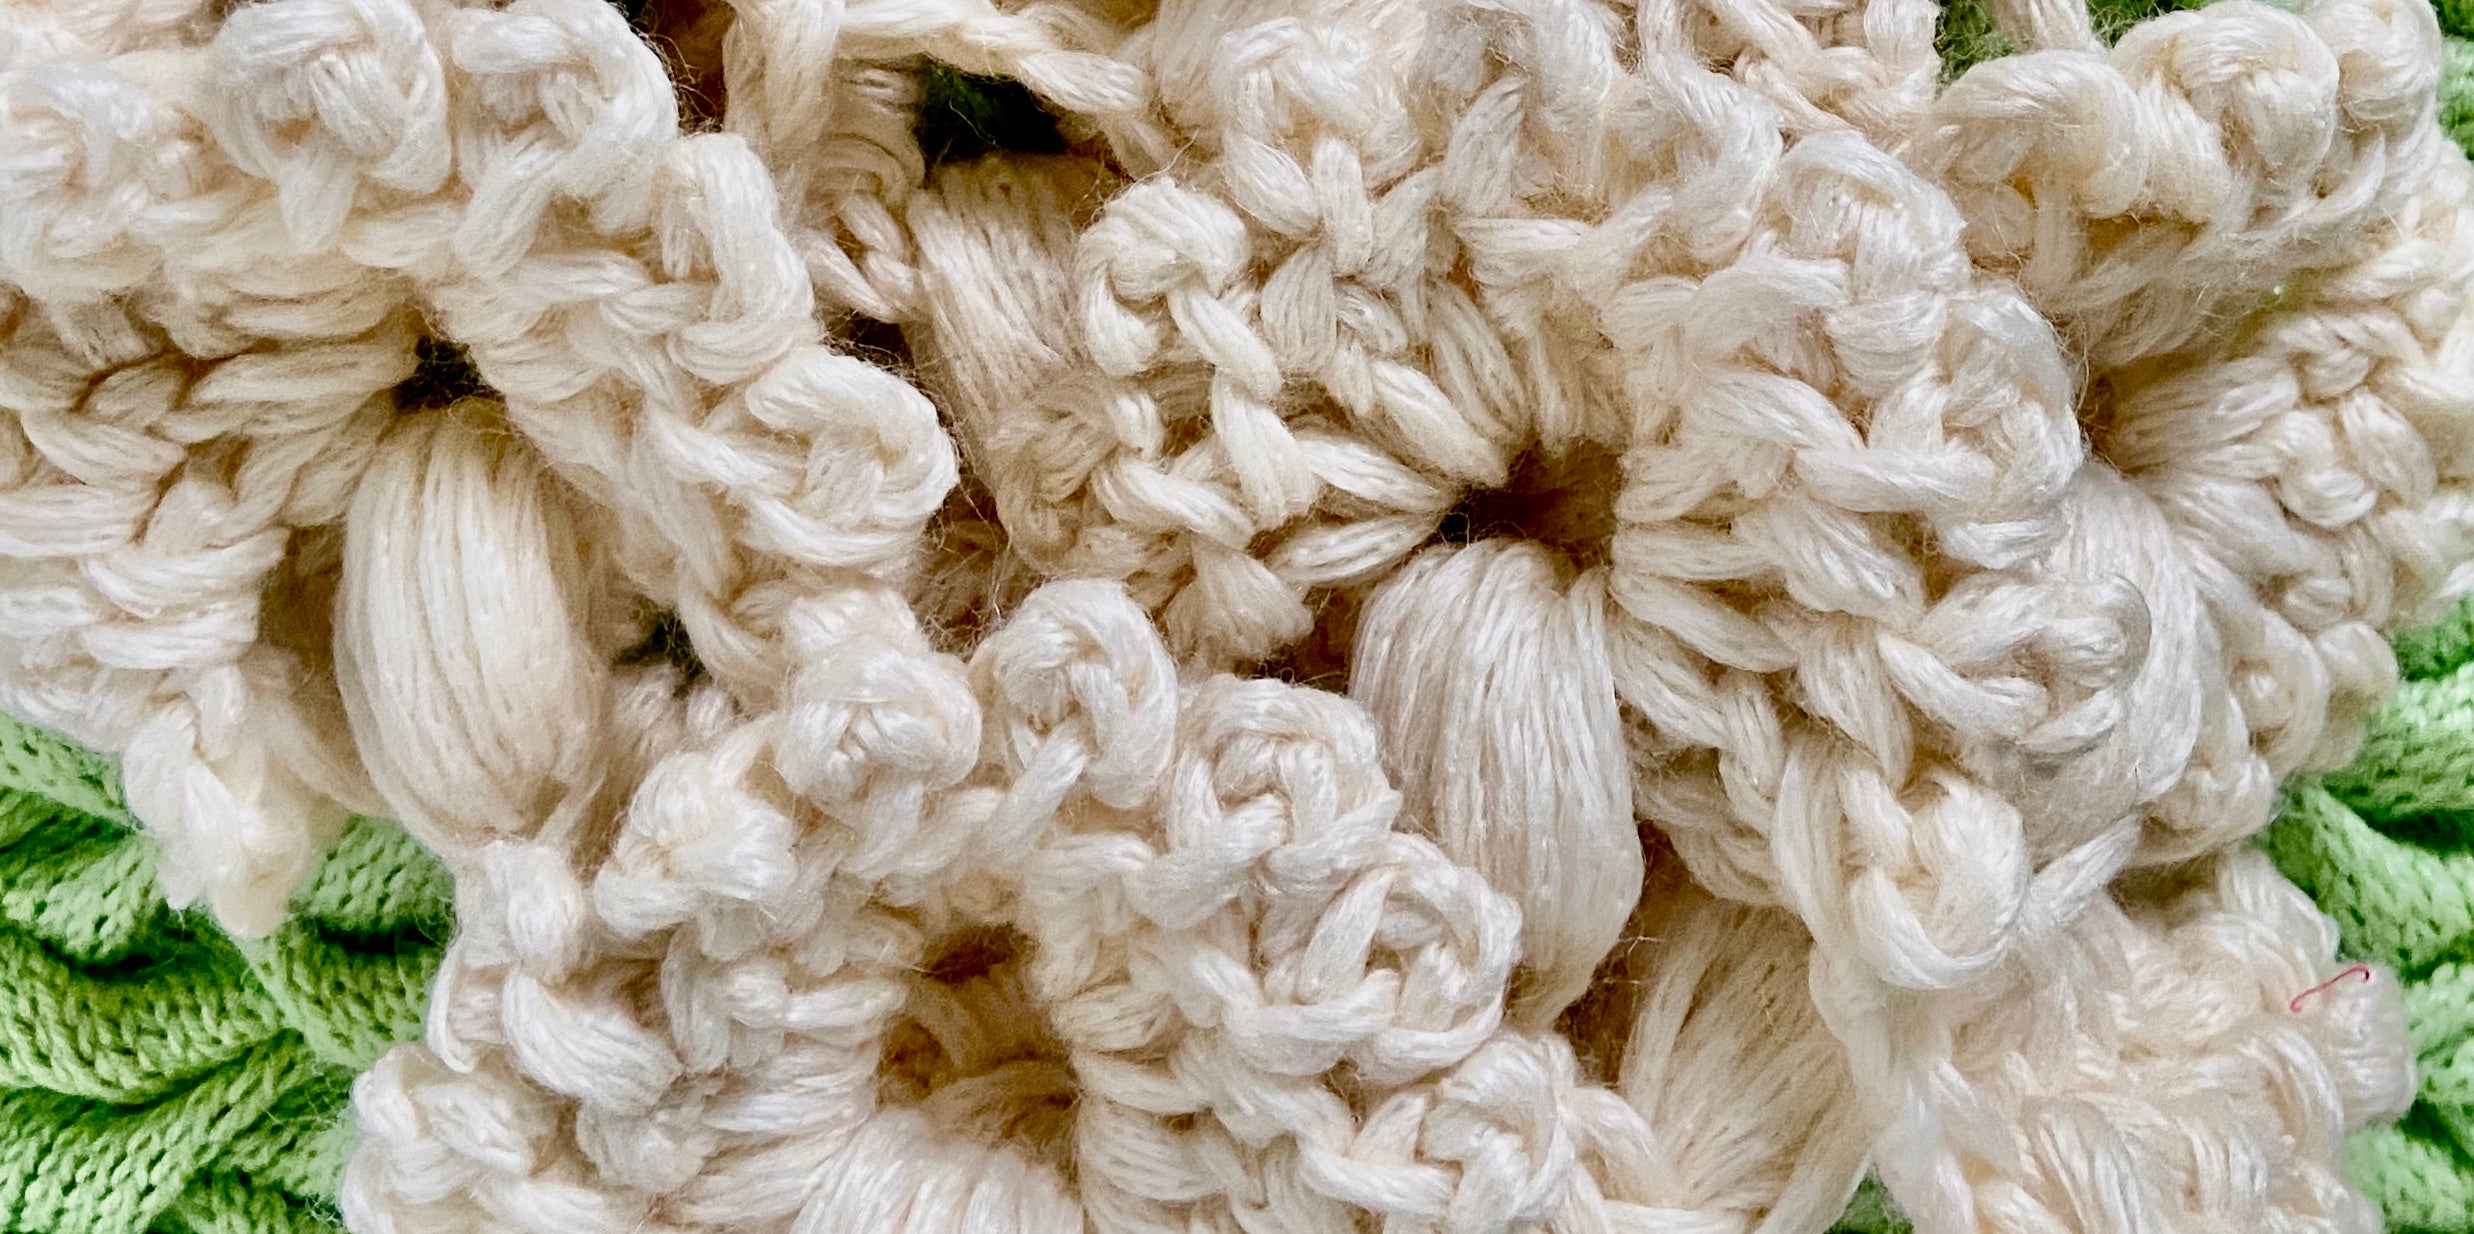 Extreme close up of white cap from the REVIVAL capsule collection by ACIEN x WOVENBEYOND. Crafted from the signature ACIEN coronation crochet textile using French merino D’arles wool and Himalayan nettle.